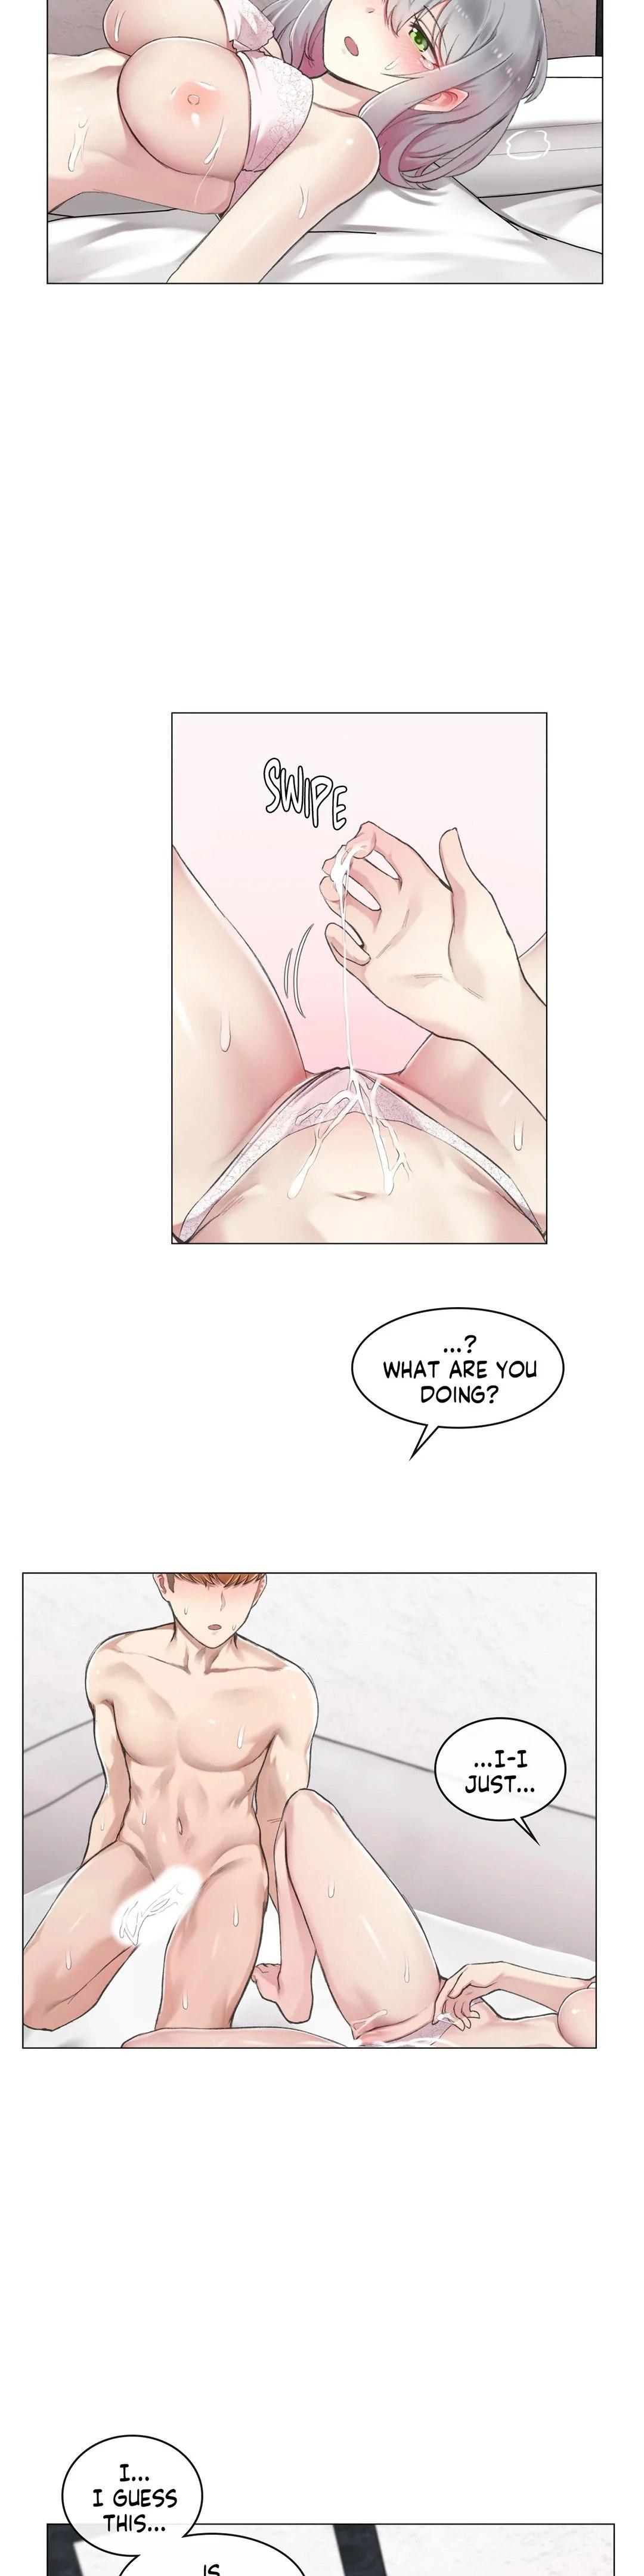 [Dumangoon, KONG_] Sexcape Room: Snap Off Ch.7/7 [English] [Manhwa PDF] Completed 127